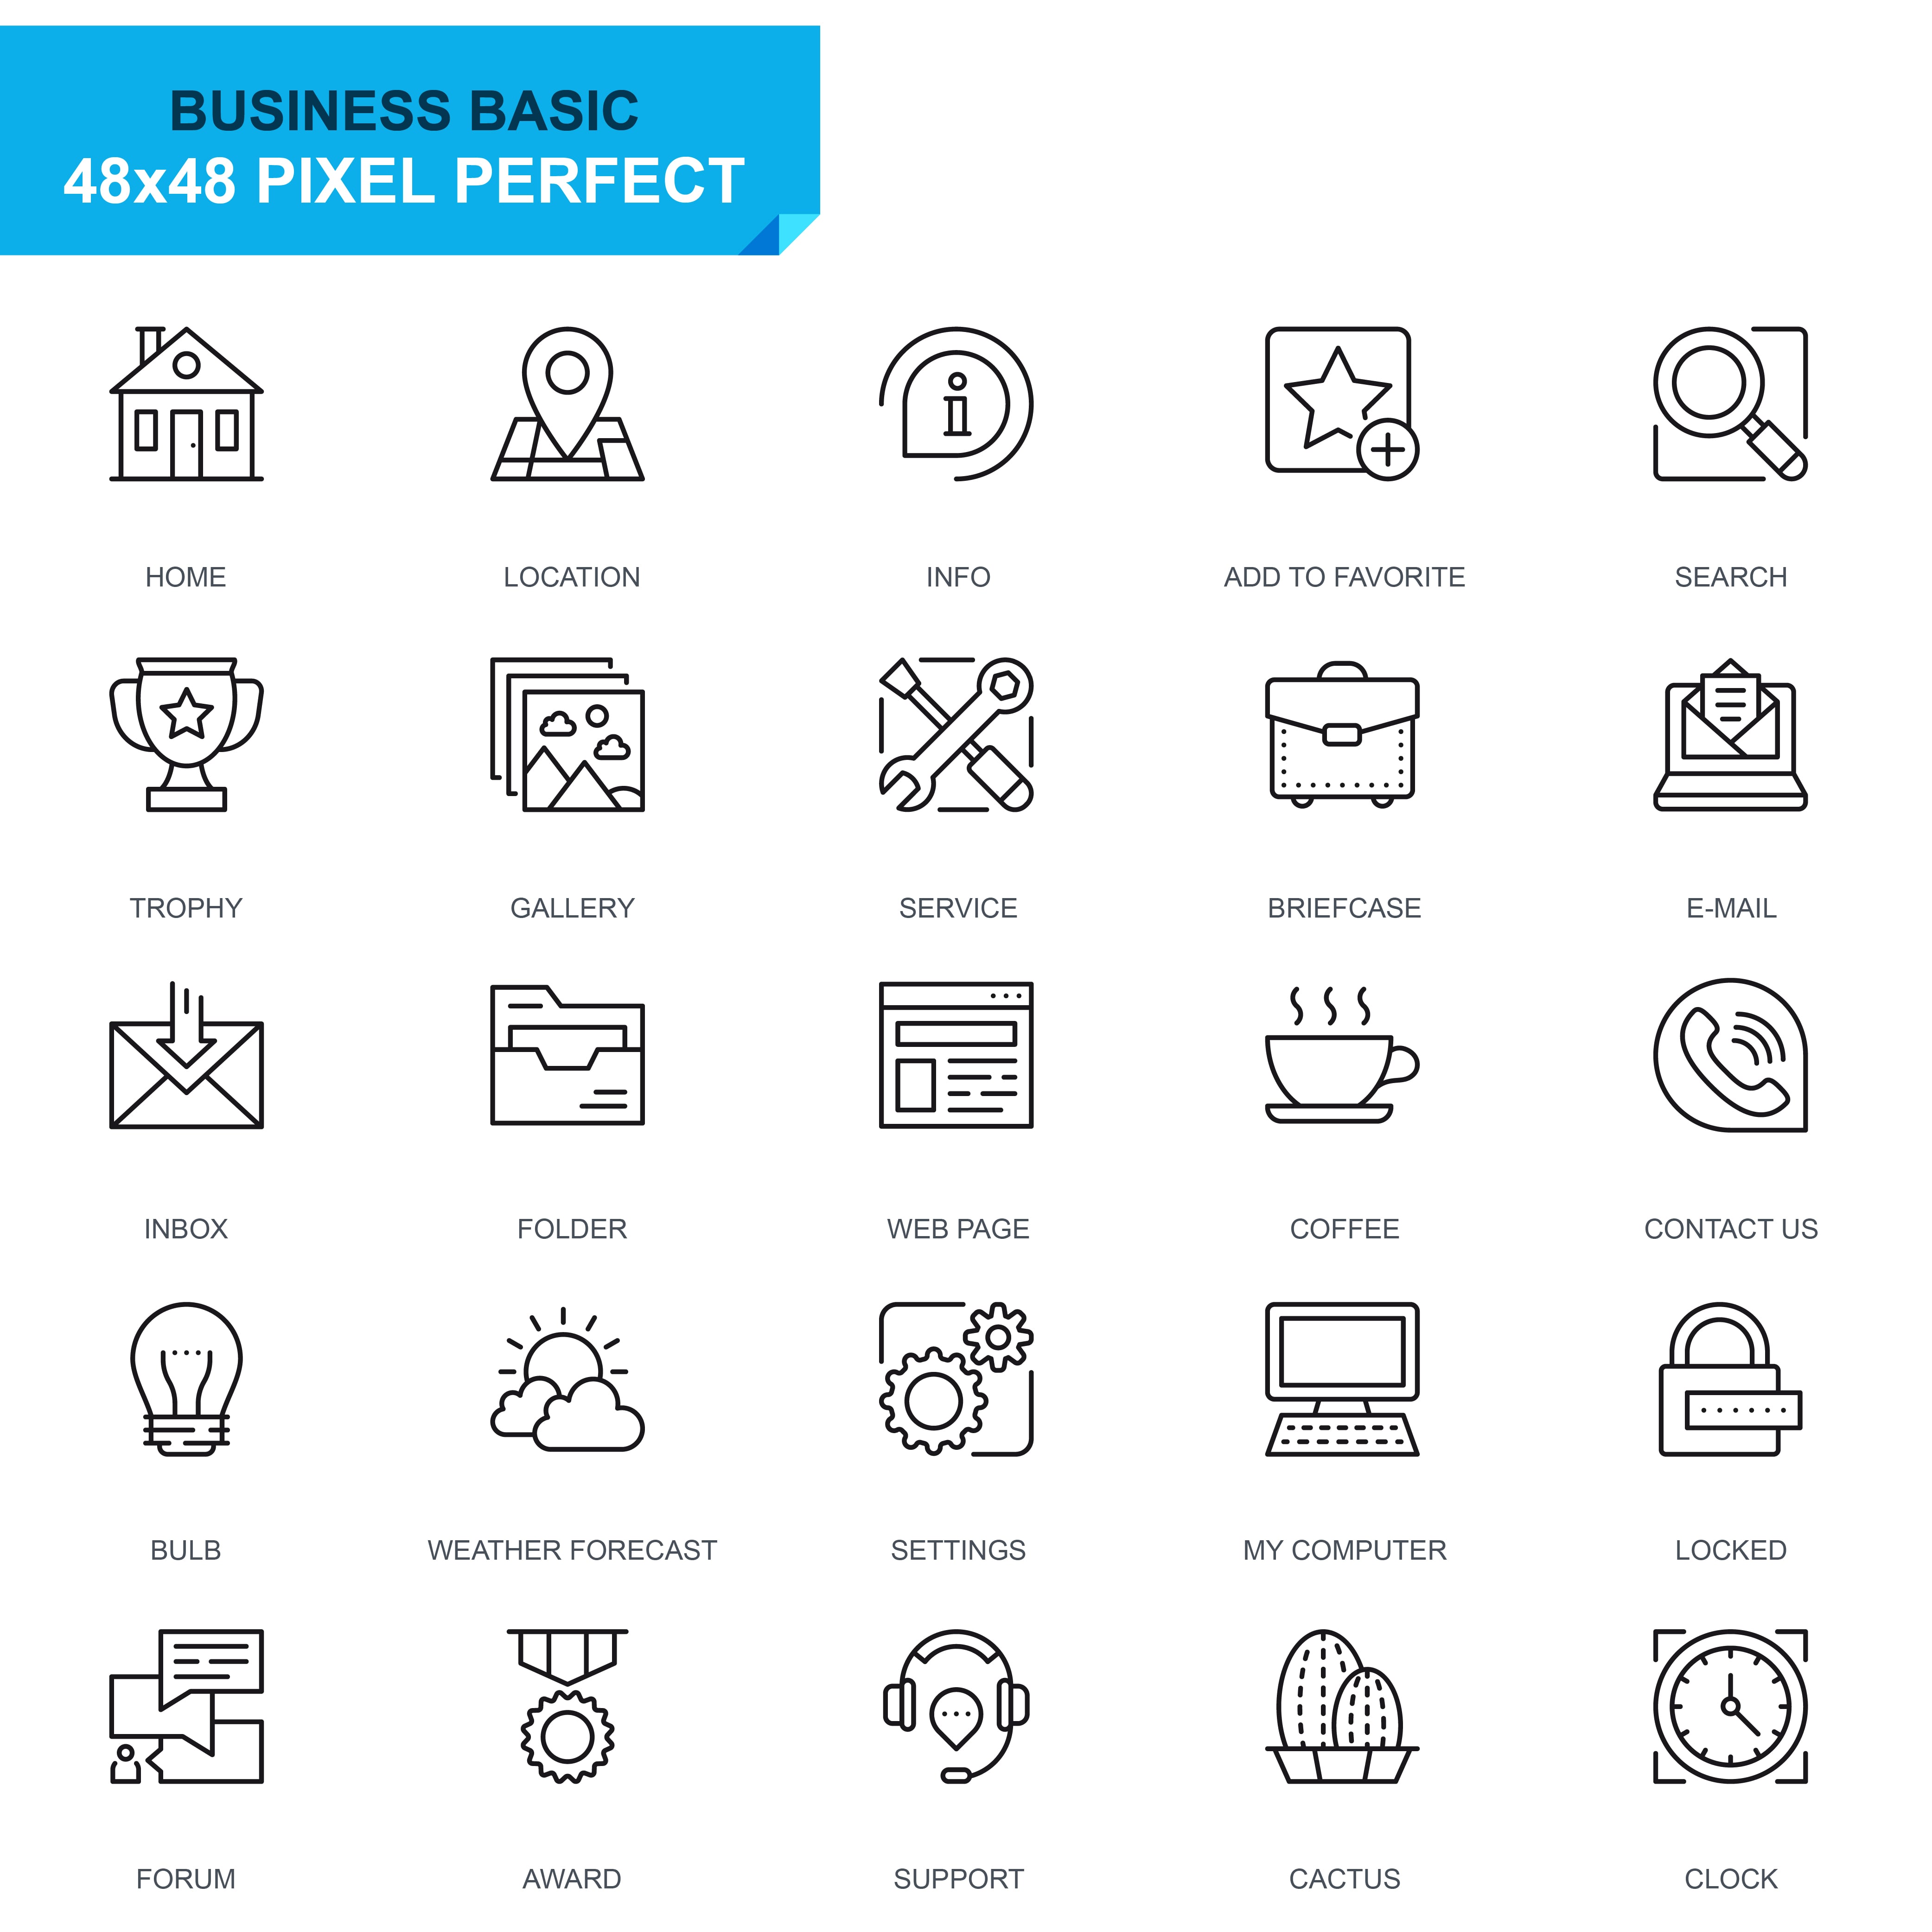 625 Thin Line Business Icons